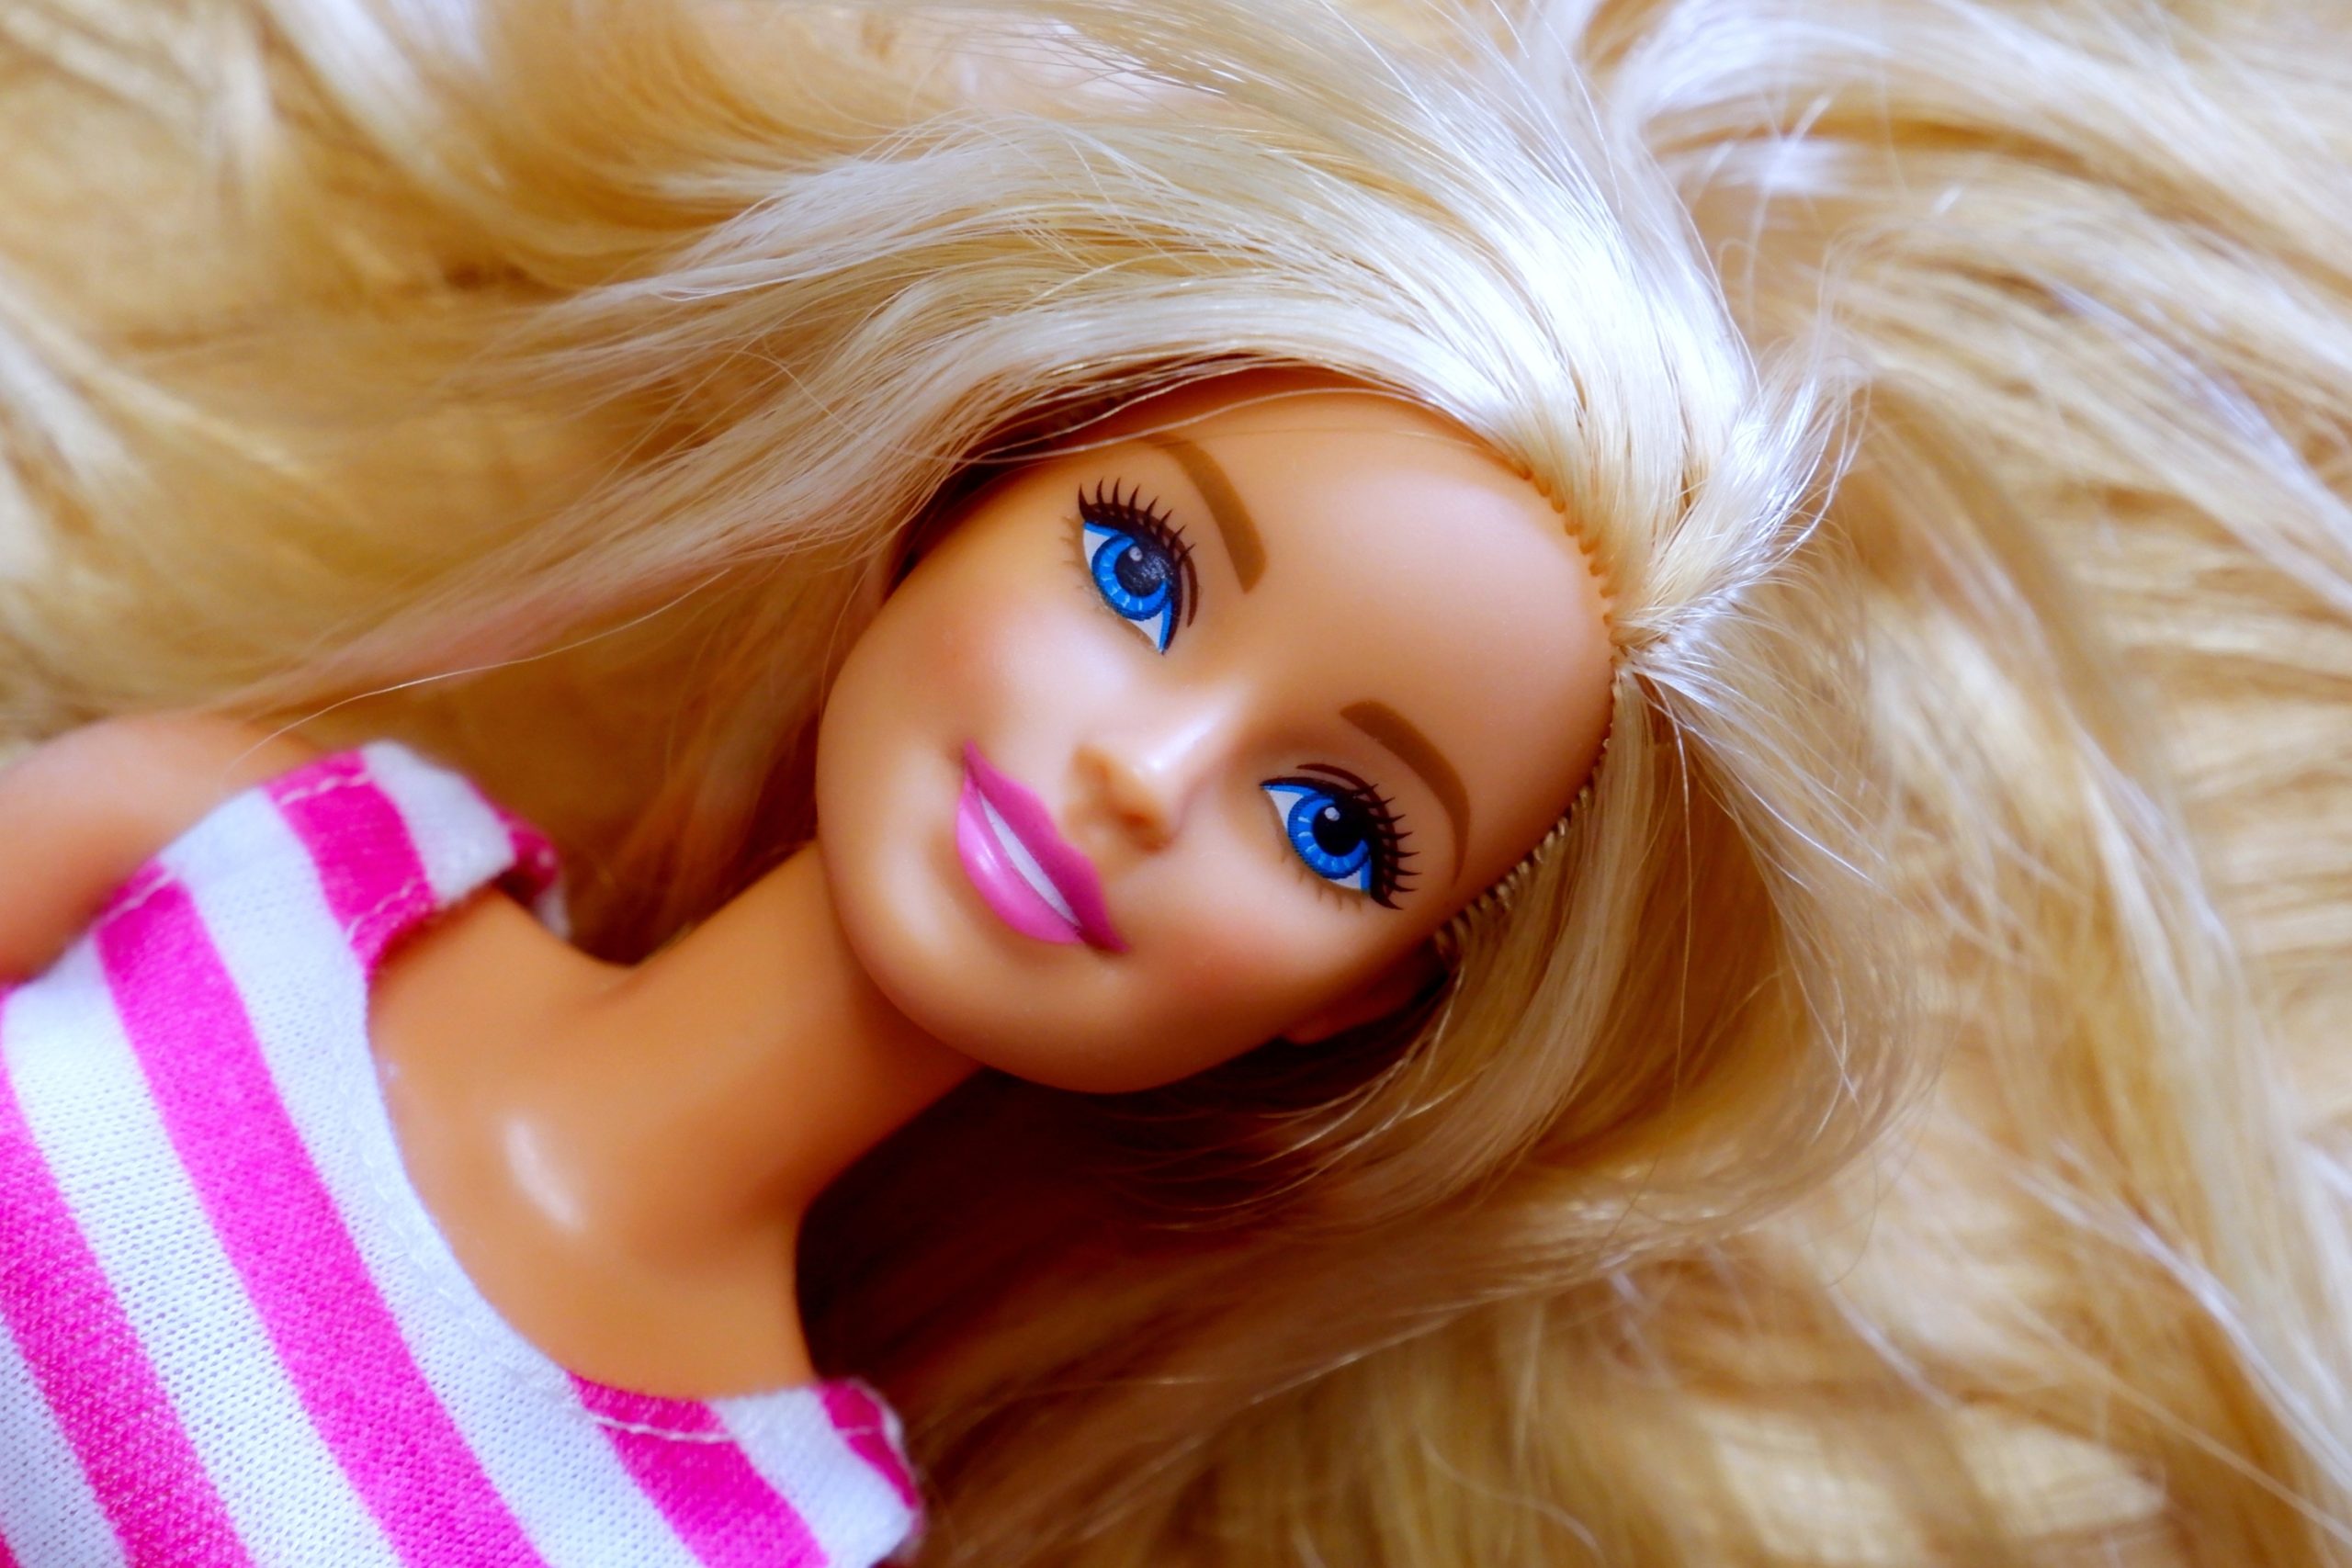 barbie-mania-is-coming-to-design-museum-with-a-huge-new-exhibition-next-year